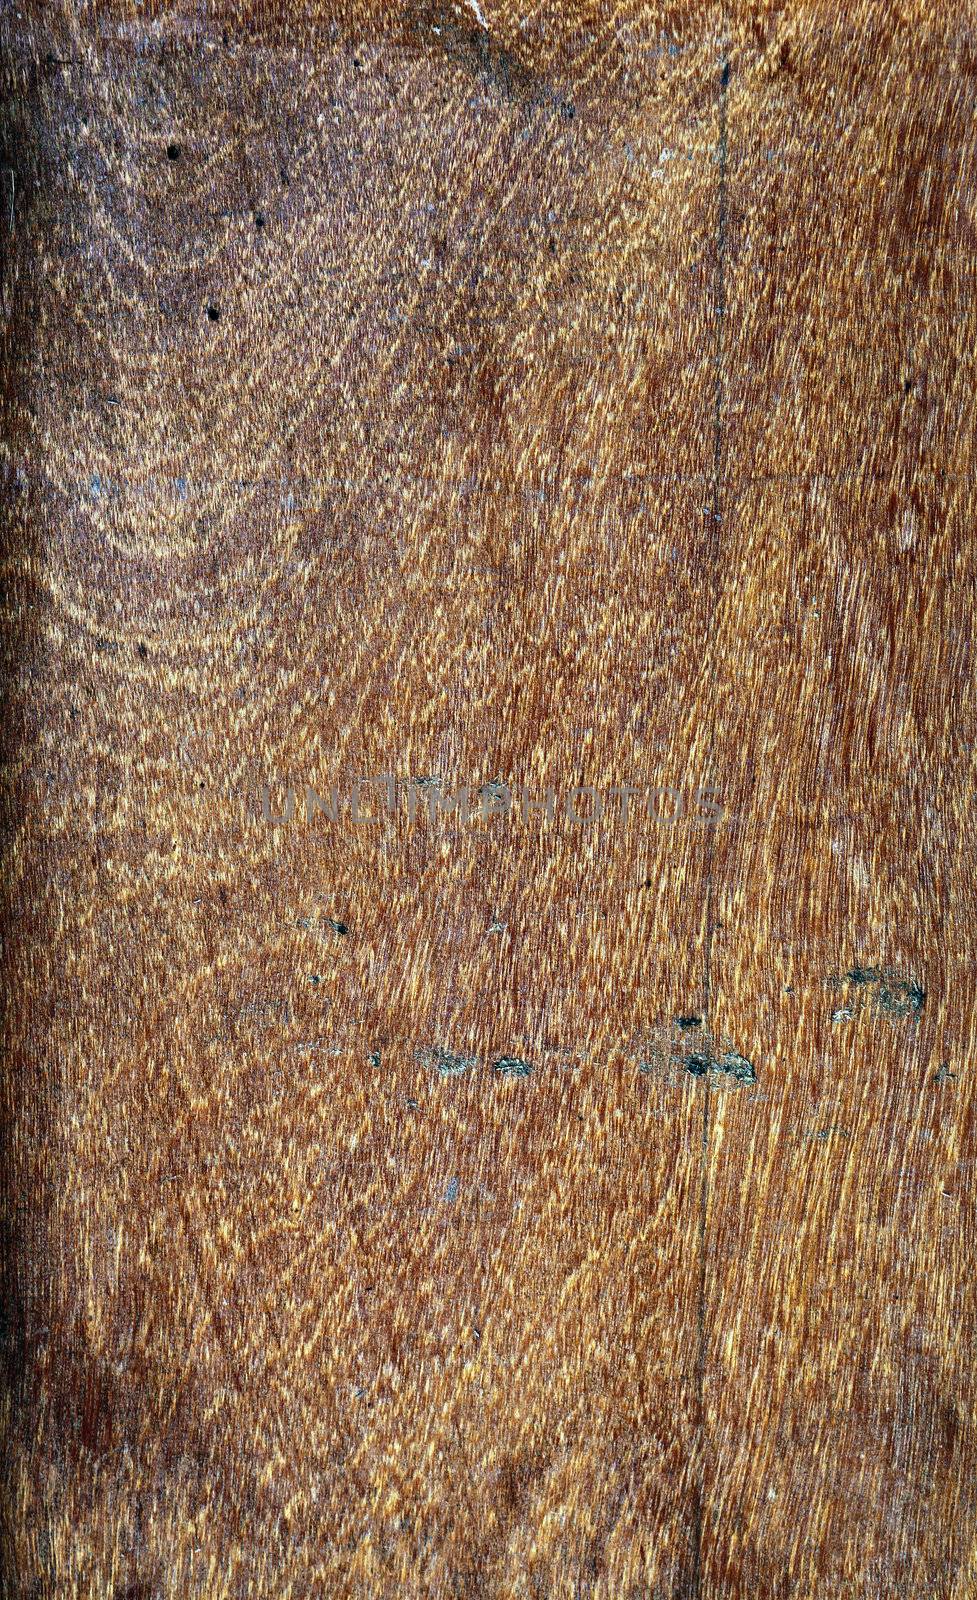 Image of close-up texture of old wooden wall